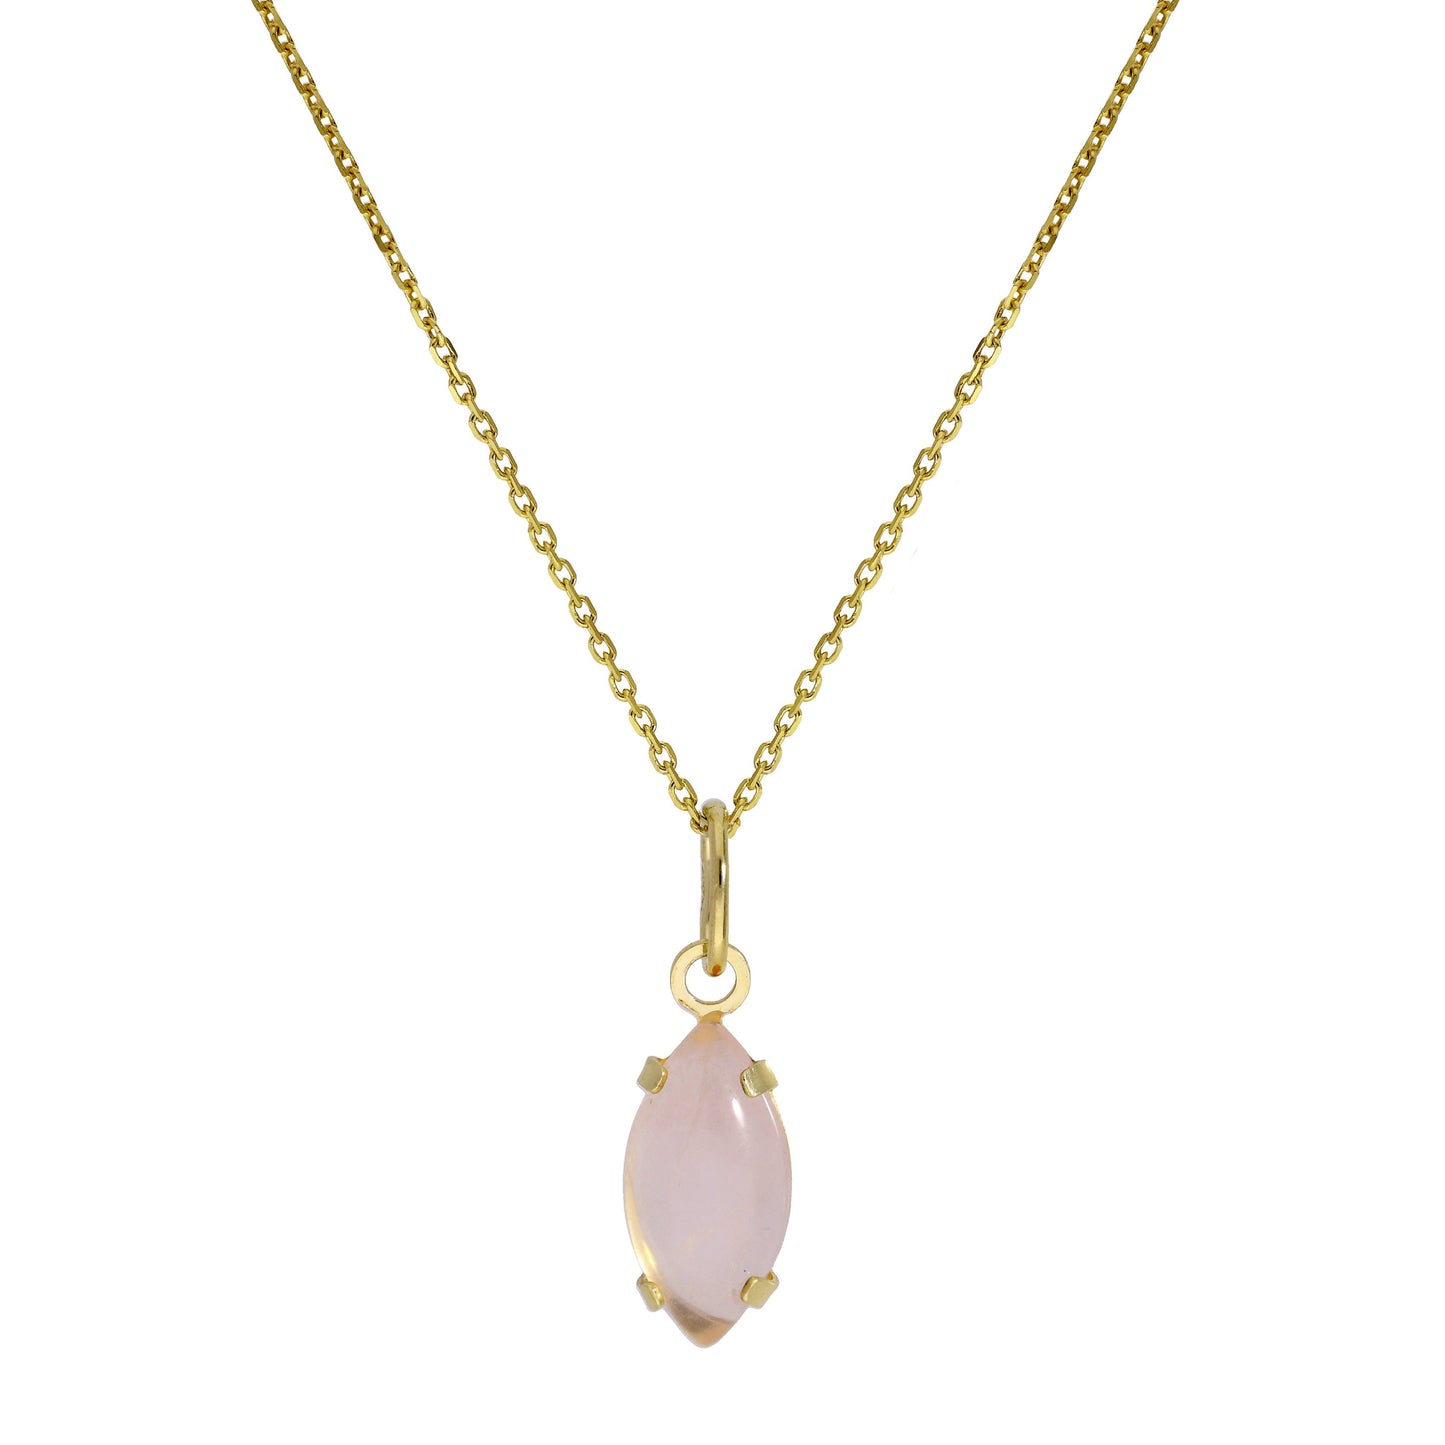 9ct Gold & Rose Quartz CZ Crystal Oval Pendant Necklace 16 - 20 Inches